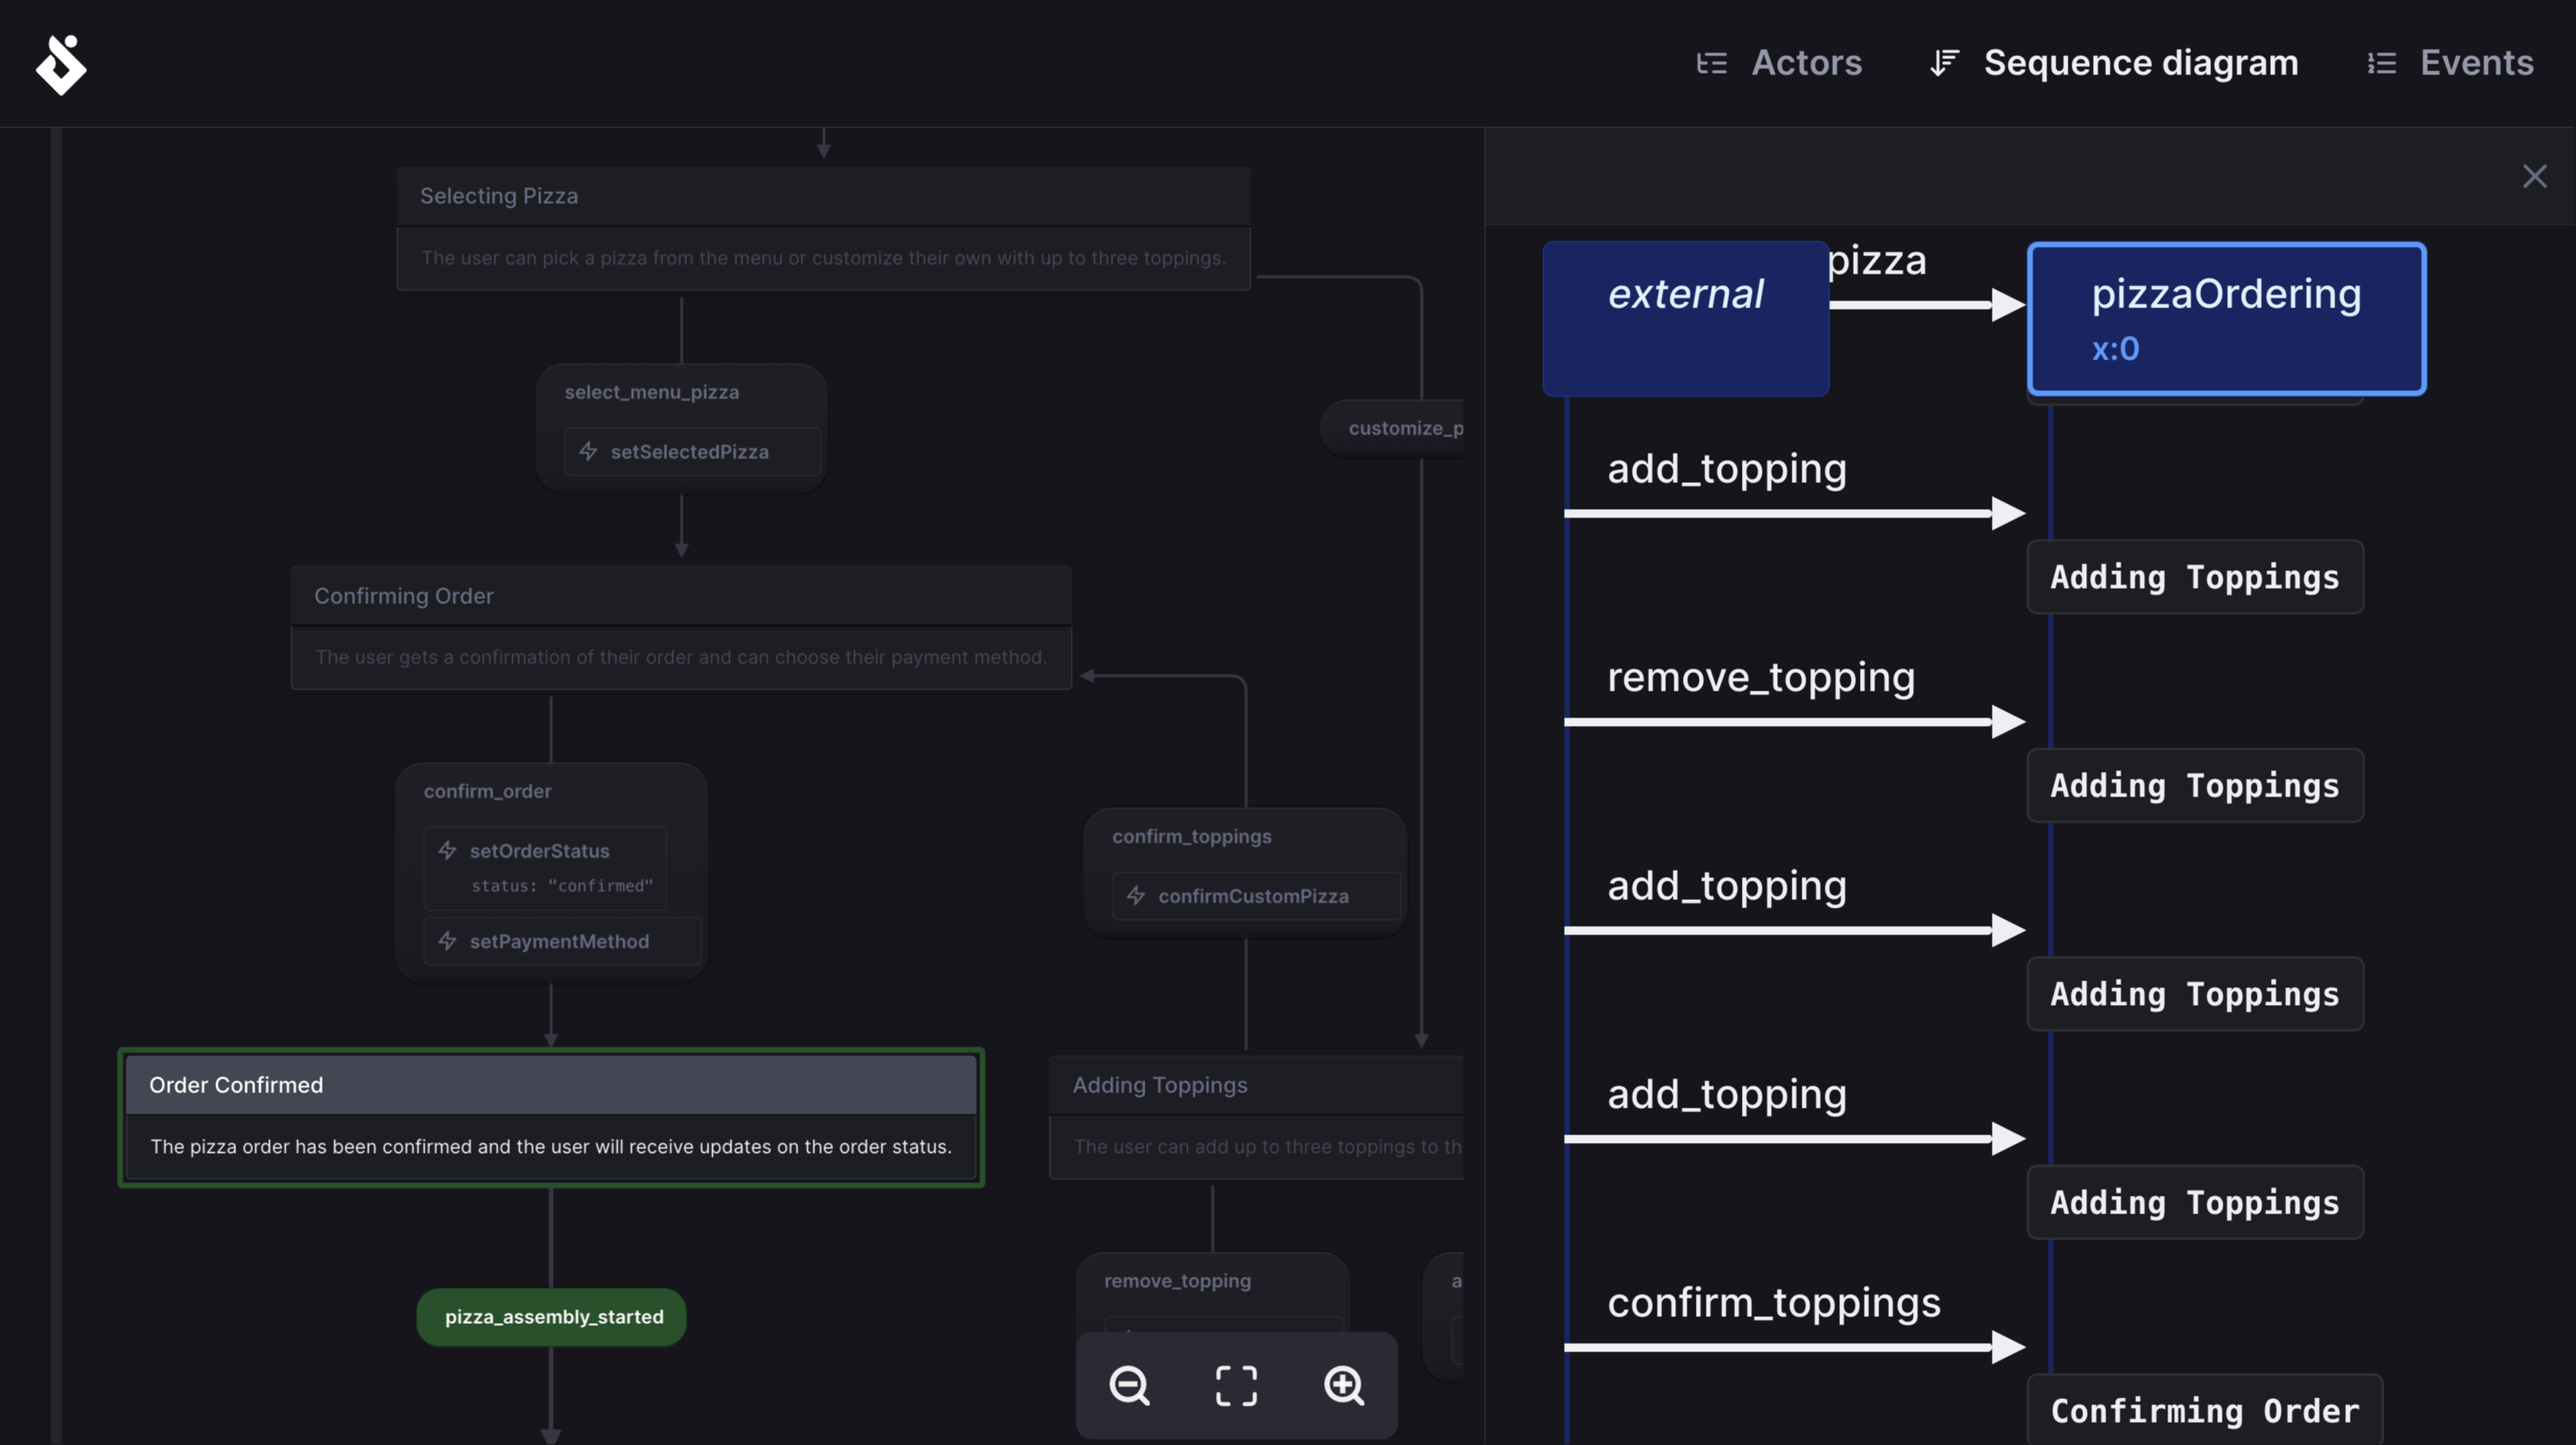 The Stately Inspector view, showing a state machine and a sequence diagram for the pizza ordering process side-by-side.